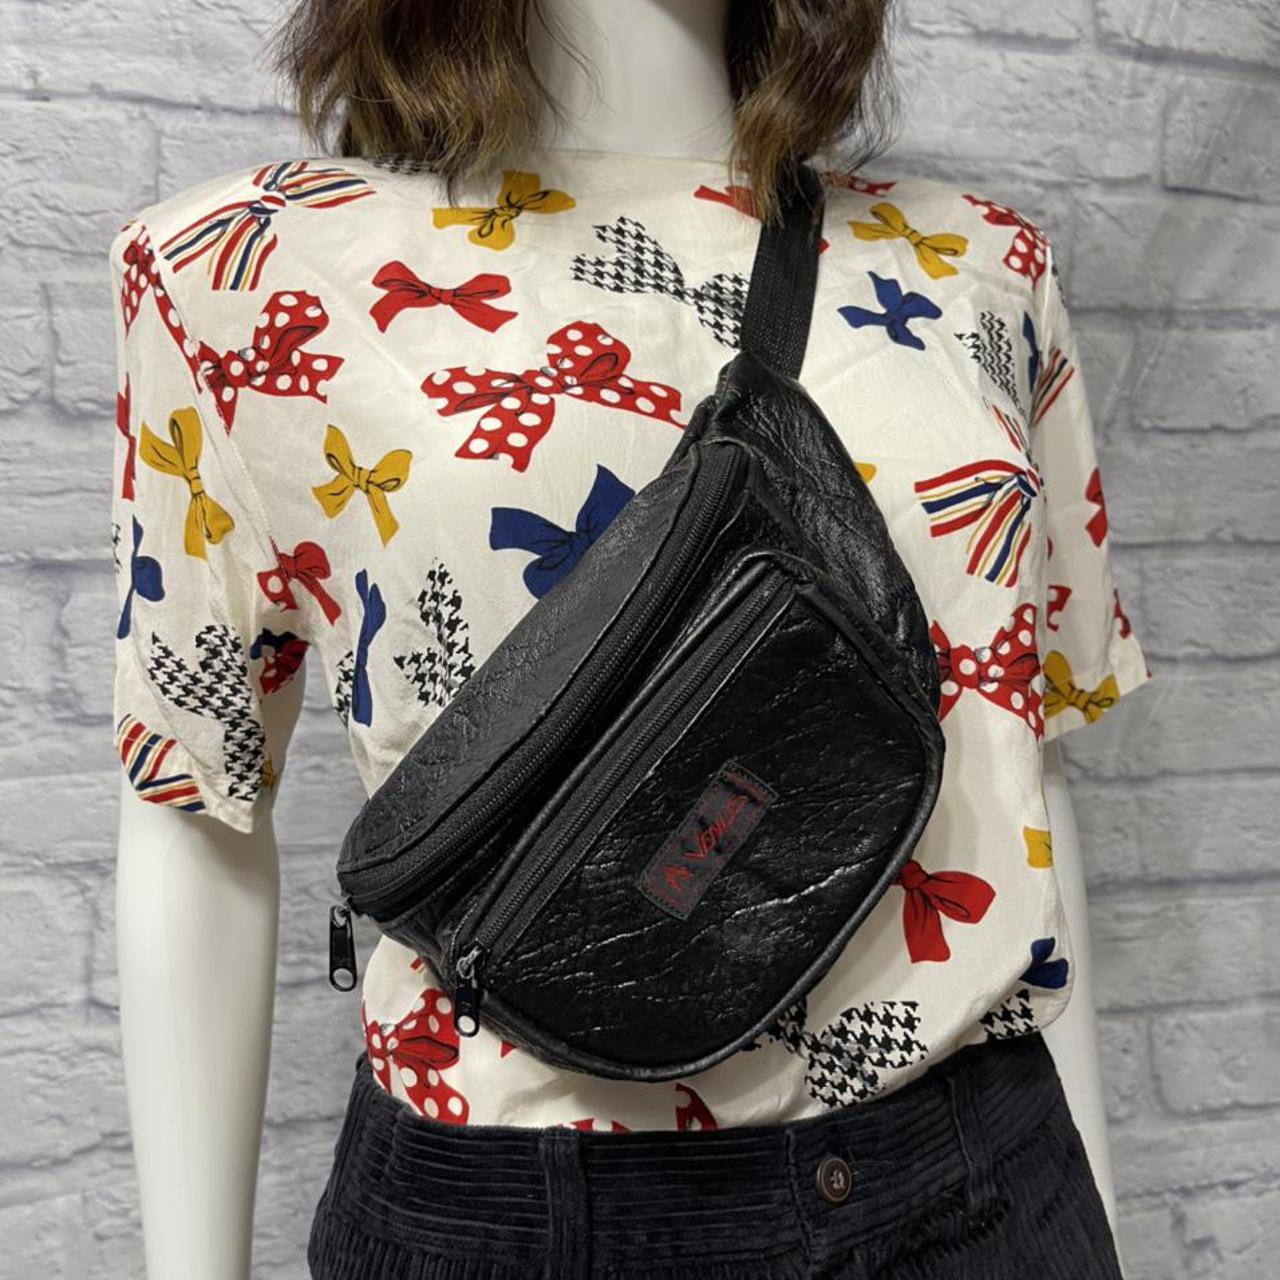 Product Image 1 - ▪️Vintage Fanny Pack▪️
Brand: Venus- From